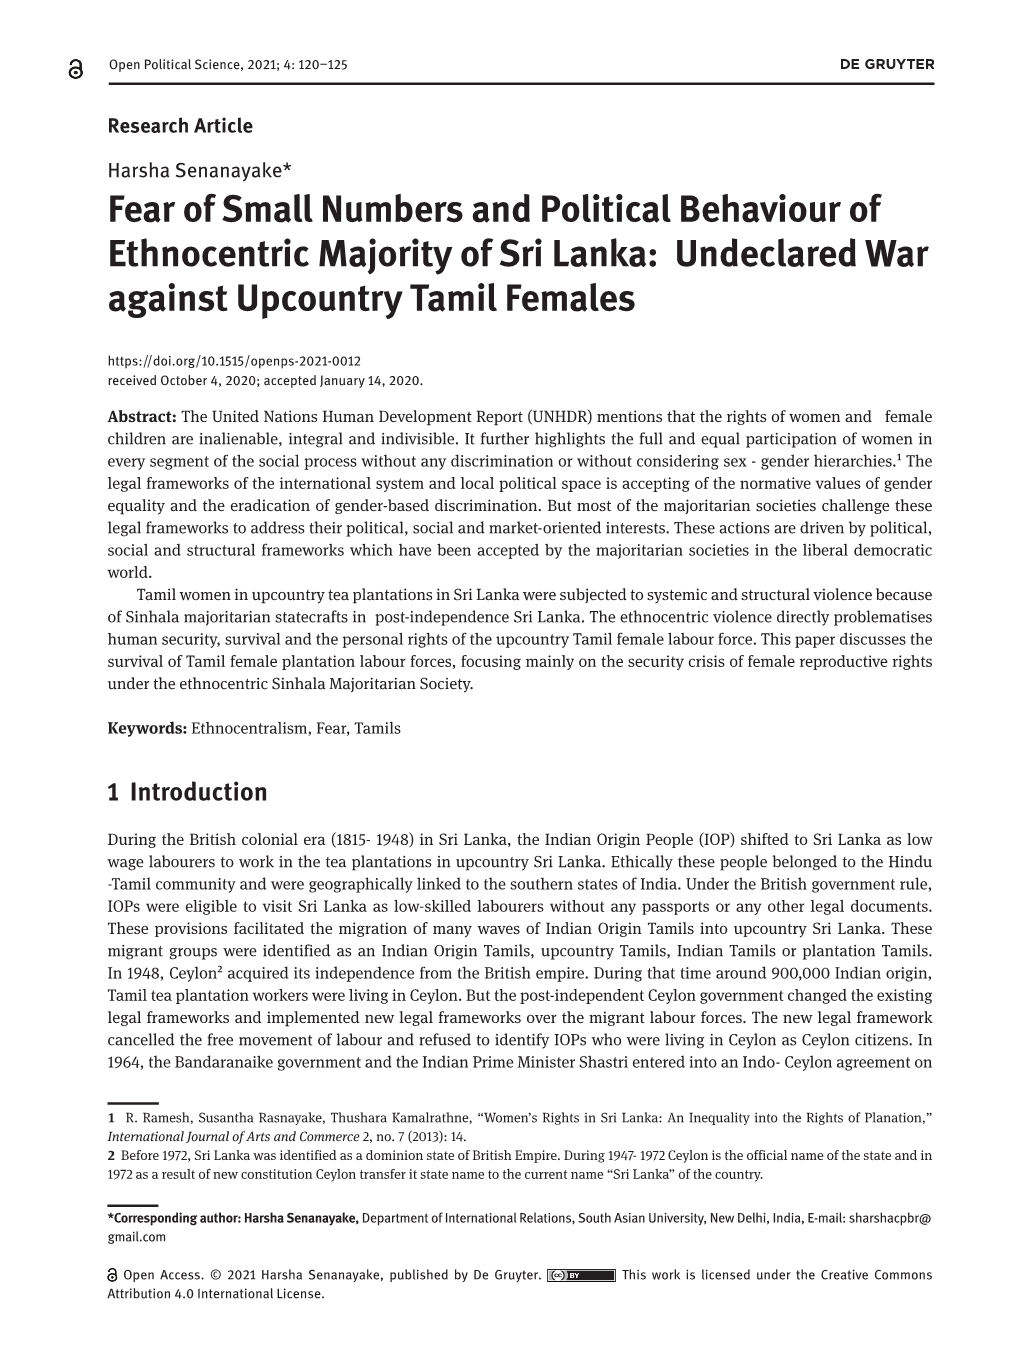 Fear of Small Numbers and Political Behaviour Of